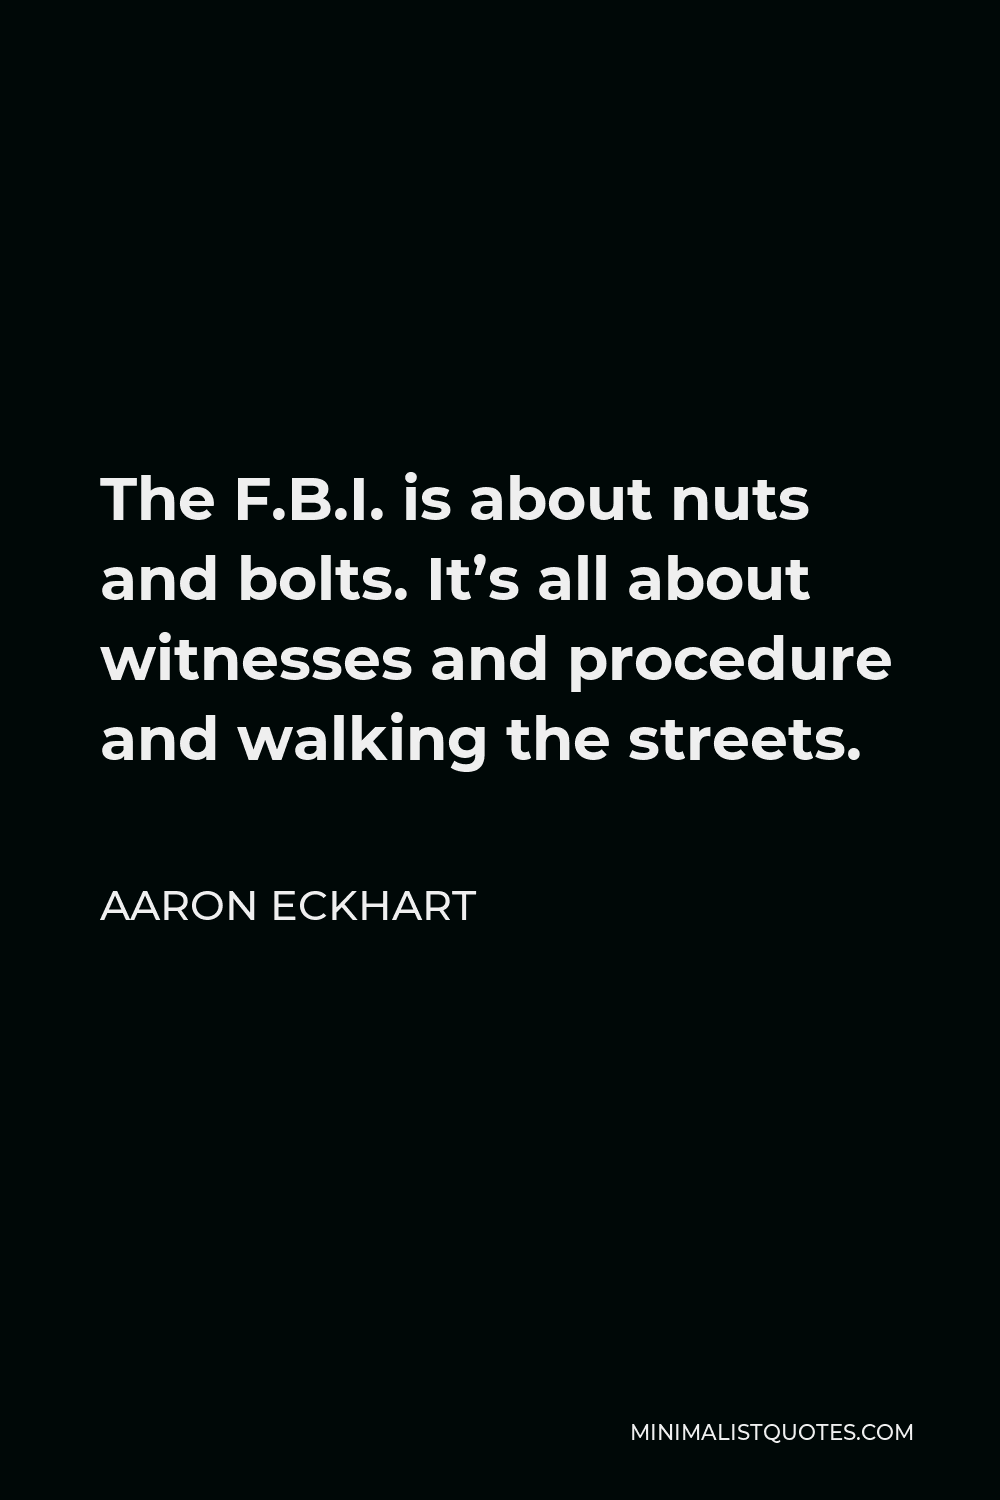 Aaron Eckhart Quote - The F.B.I. is about nuts and bolts. It’s all about witnesses and procedure and walking the streets.